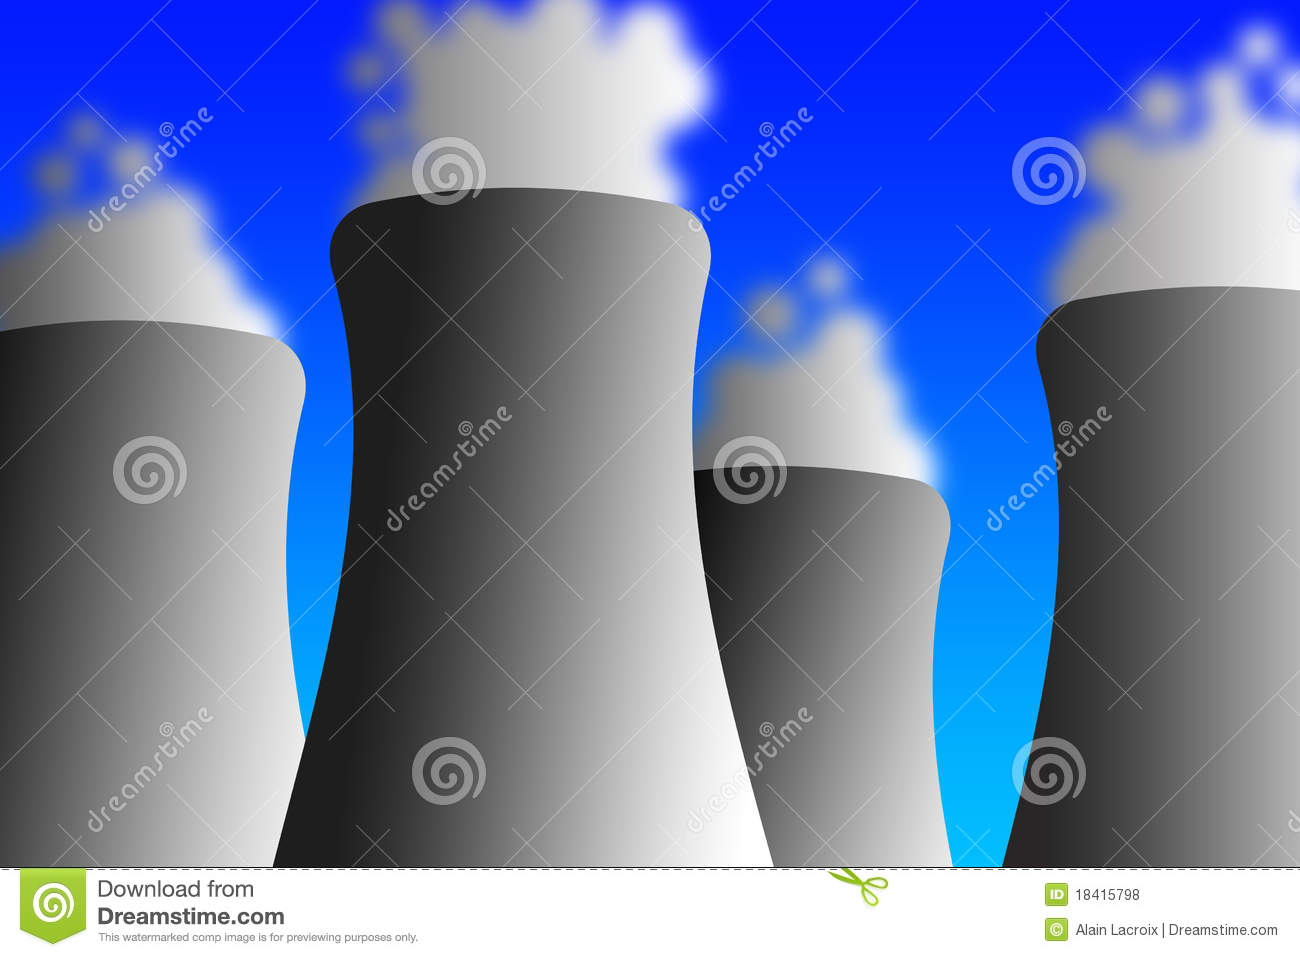 Cooling Towers With Rising Water Vapor  As Used By Power Plants